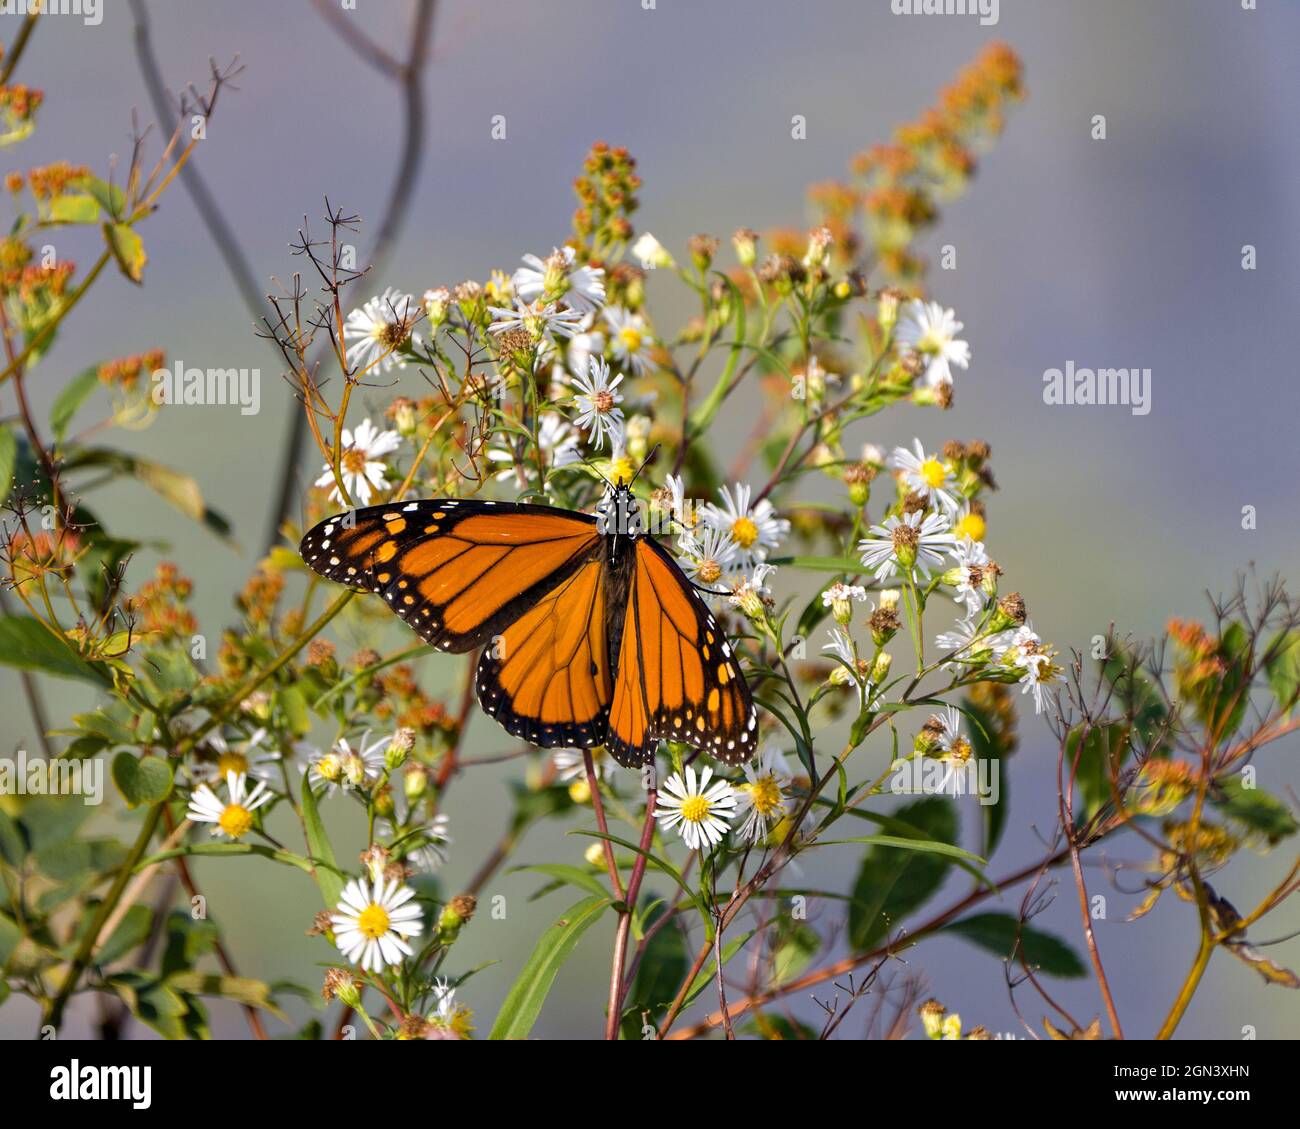 Monarch Butterfly sipping or drinking nectar from a plant with a blur background and white flowers in its environment and surrounding. Butterfly Image Stock Photo